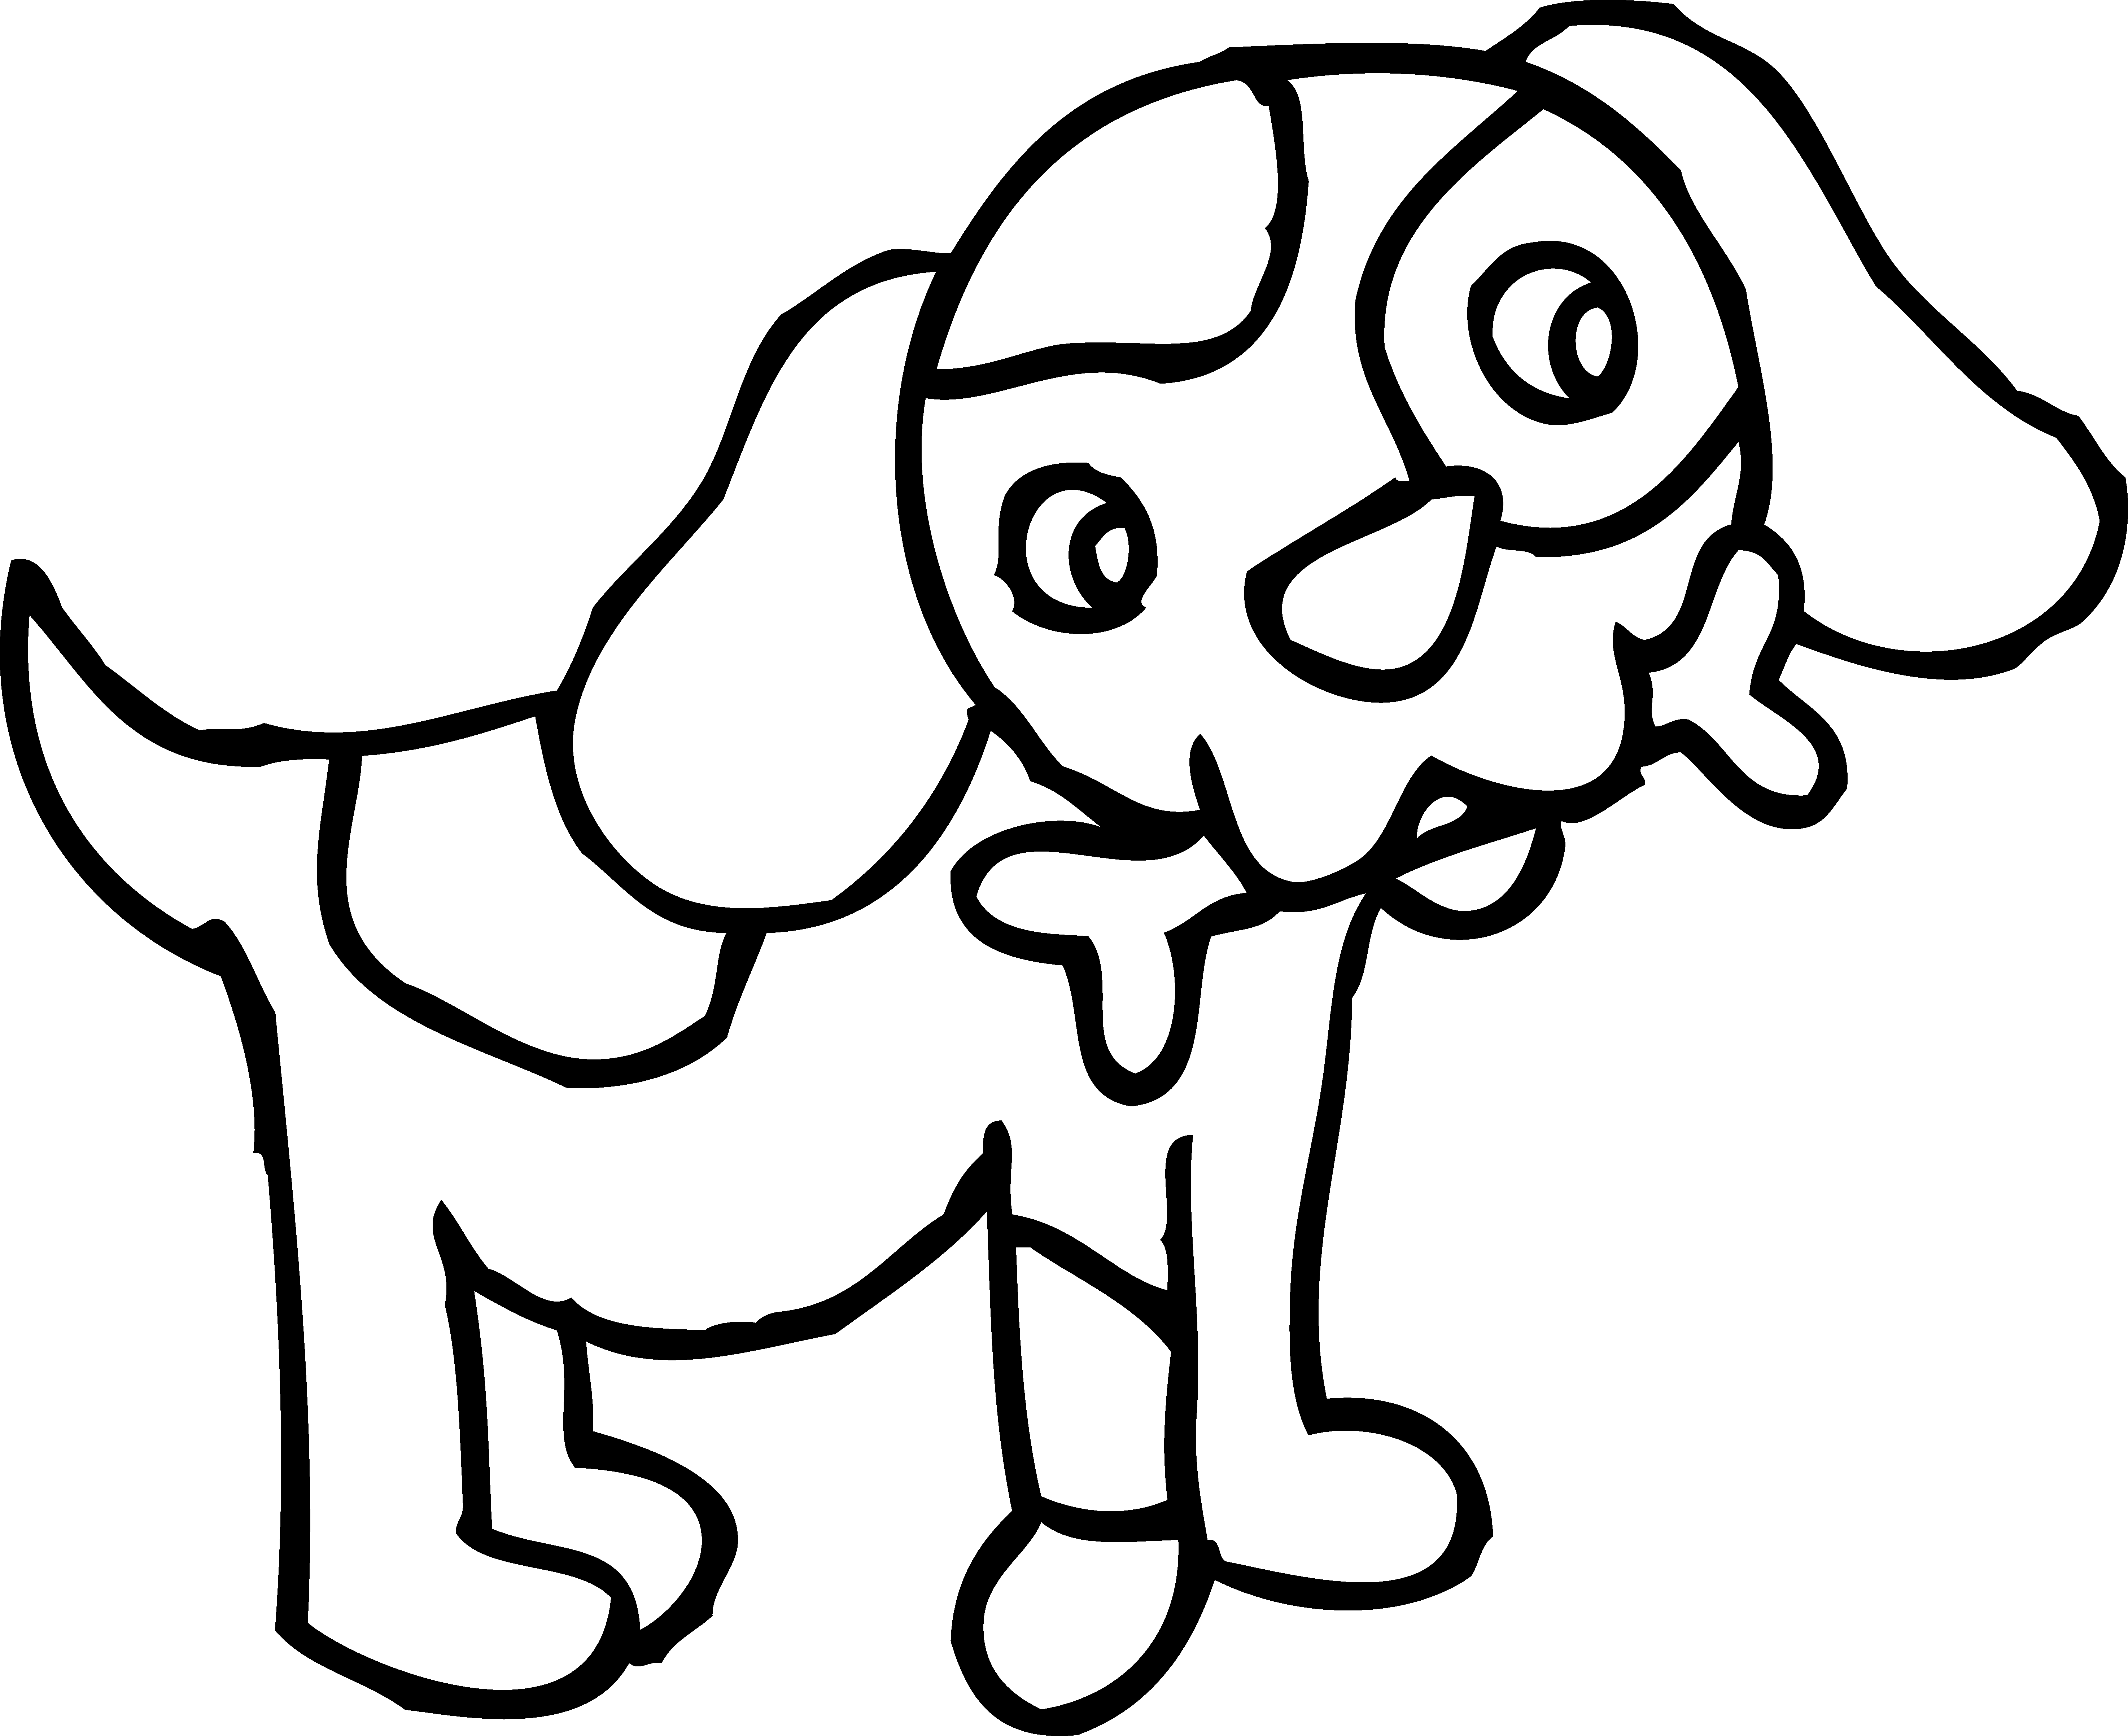 11 Pics Of Dog Outline Coloring Page Dog Outlines Printable, Dog